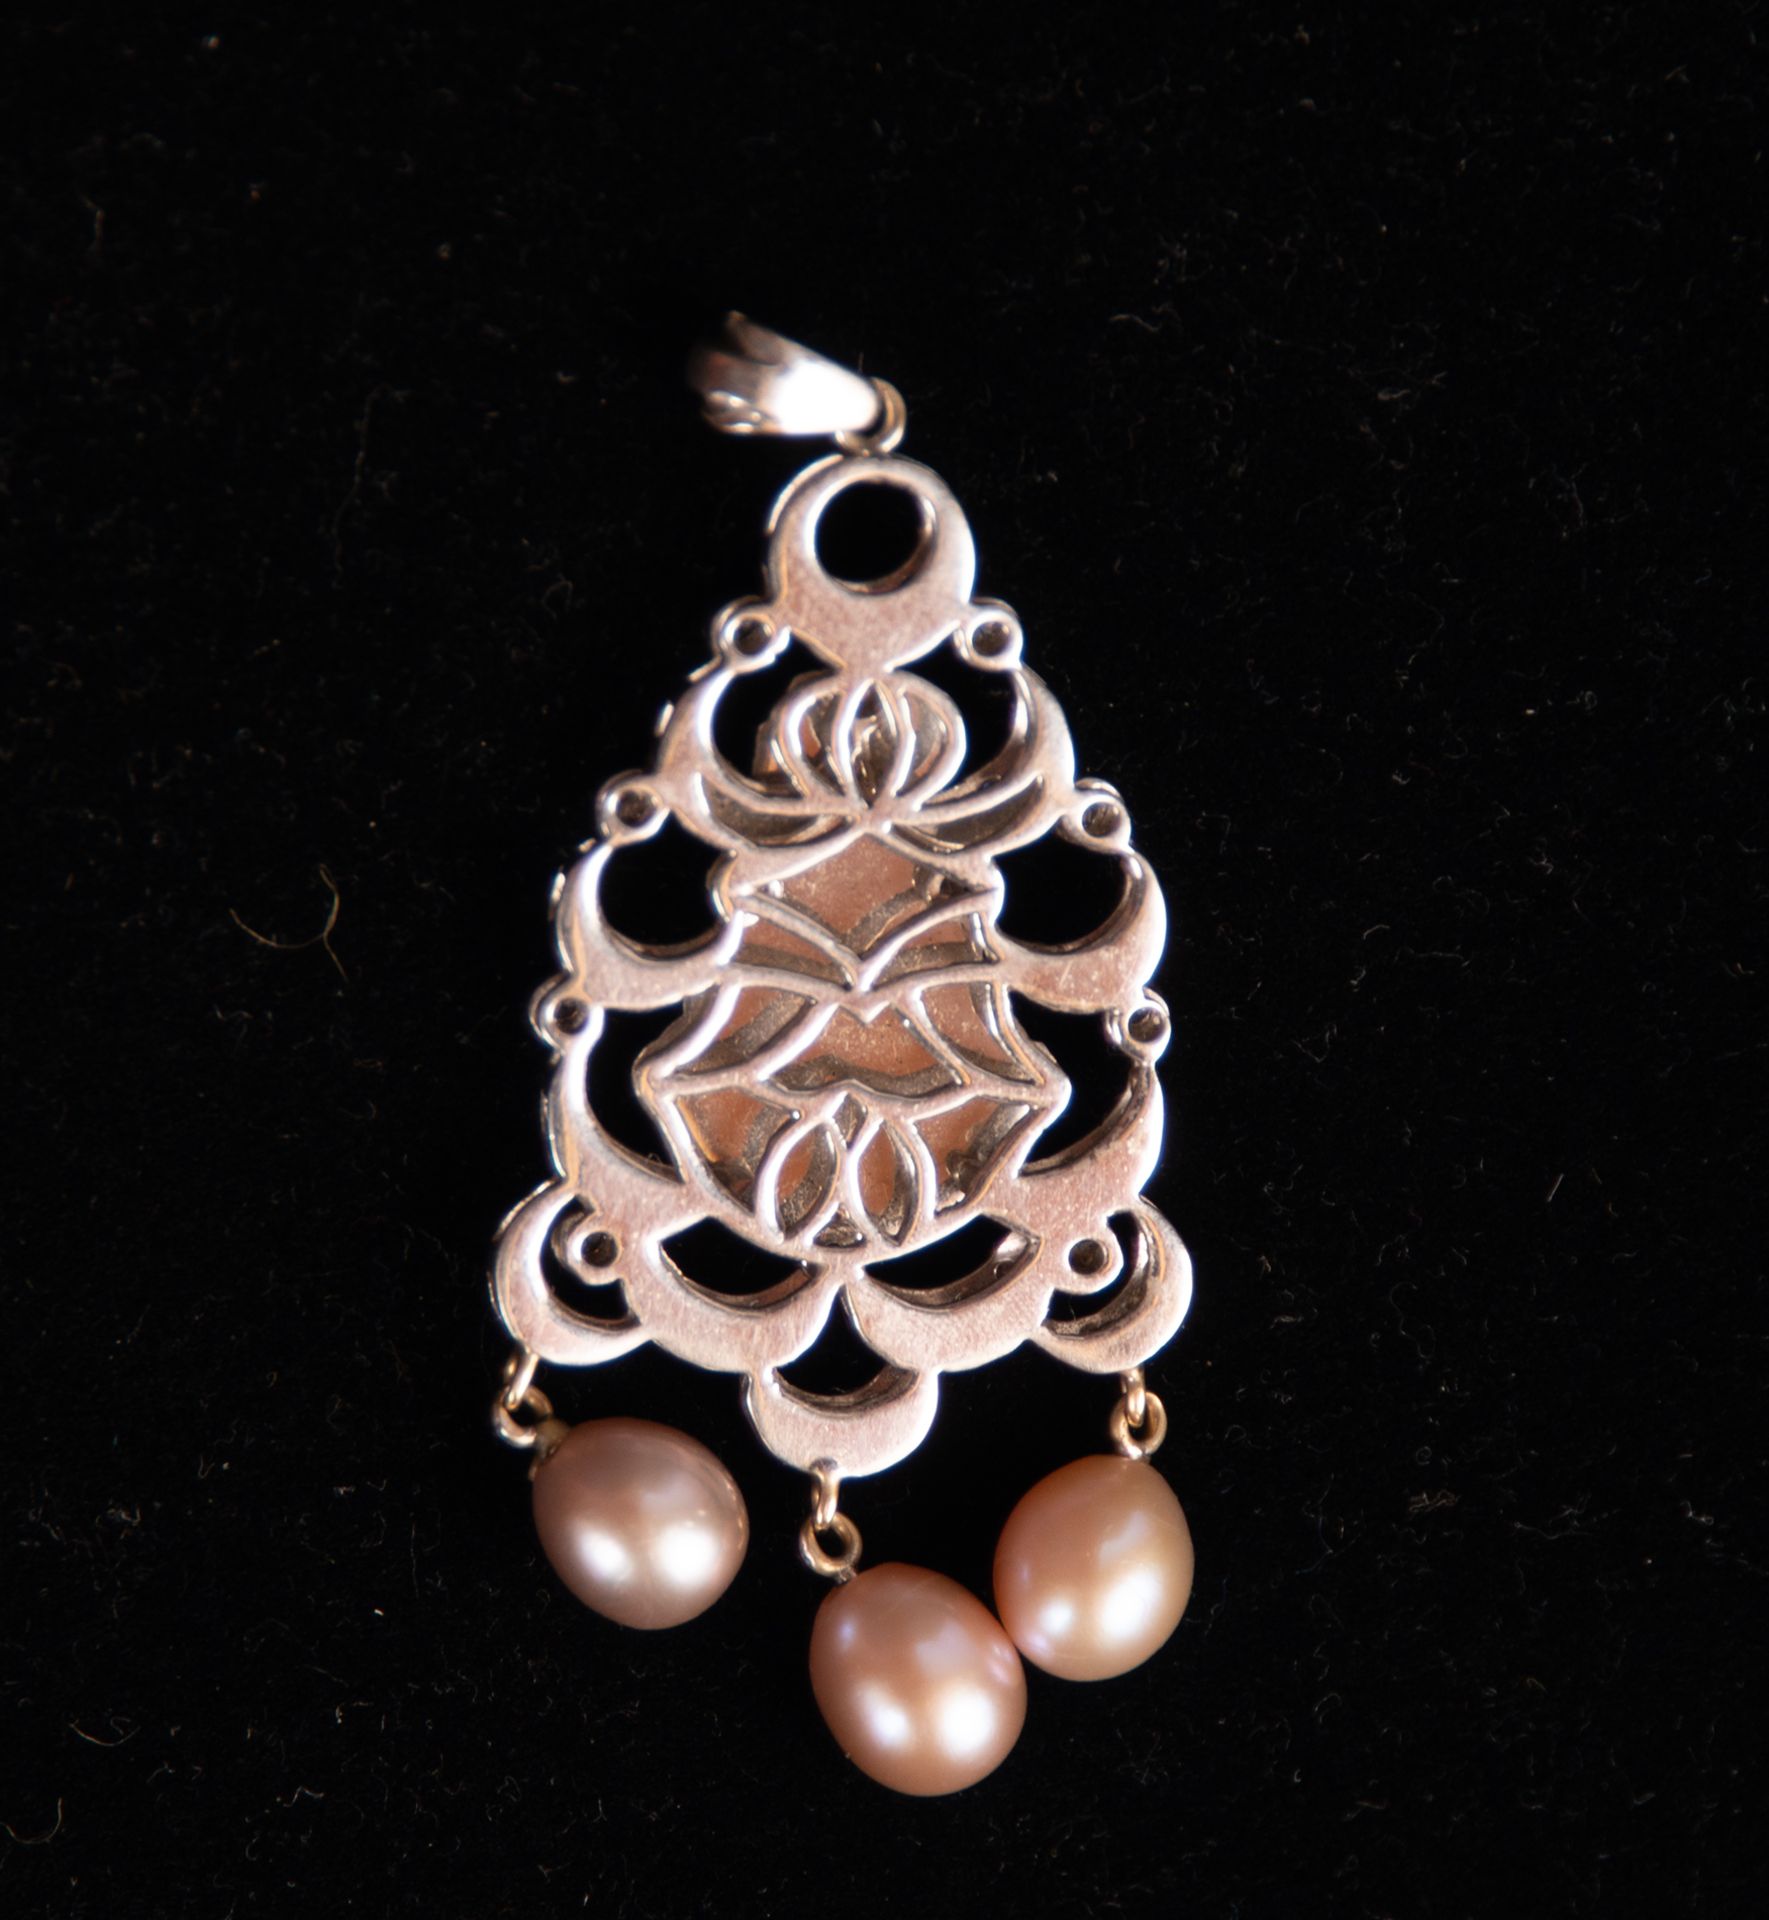 Pendant of the Virgen del Rocío mounted in White Gold, Pearls and Diamonds - Image 4 of 4